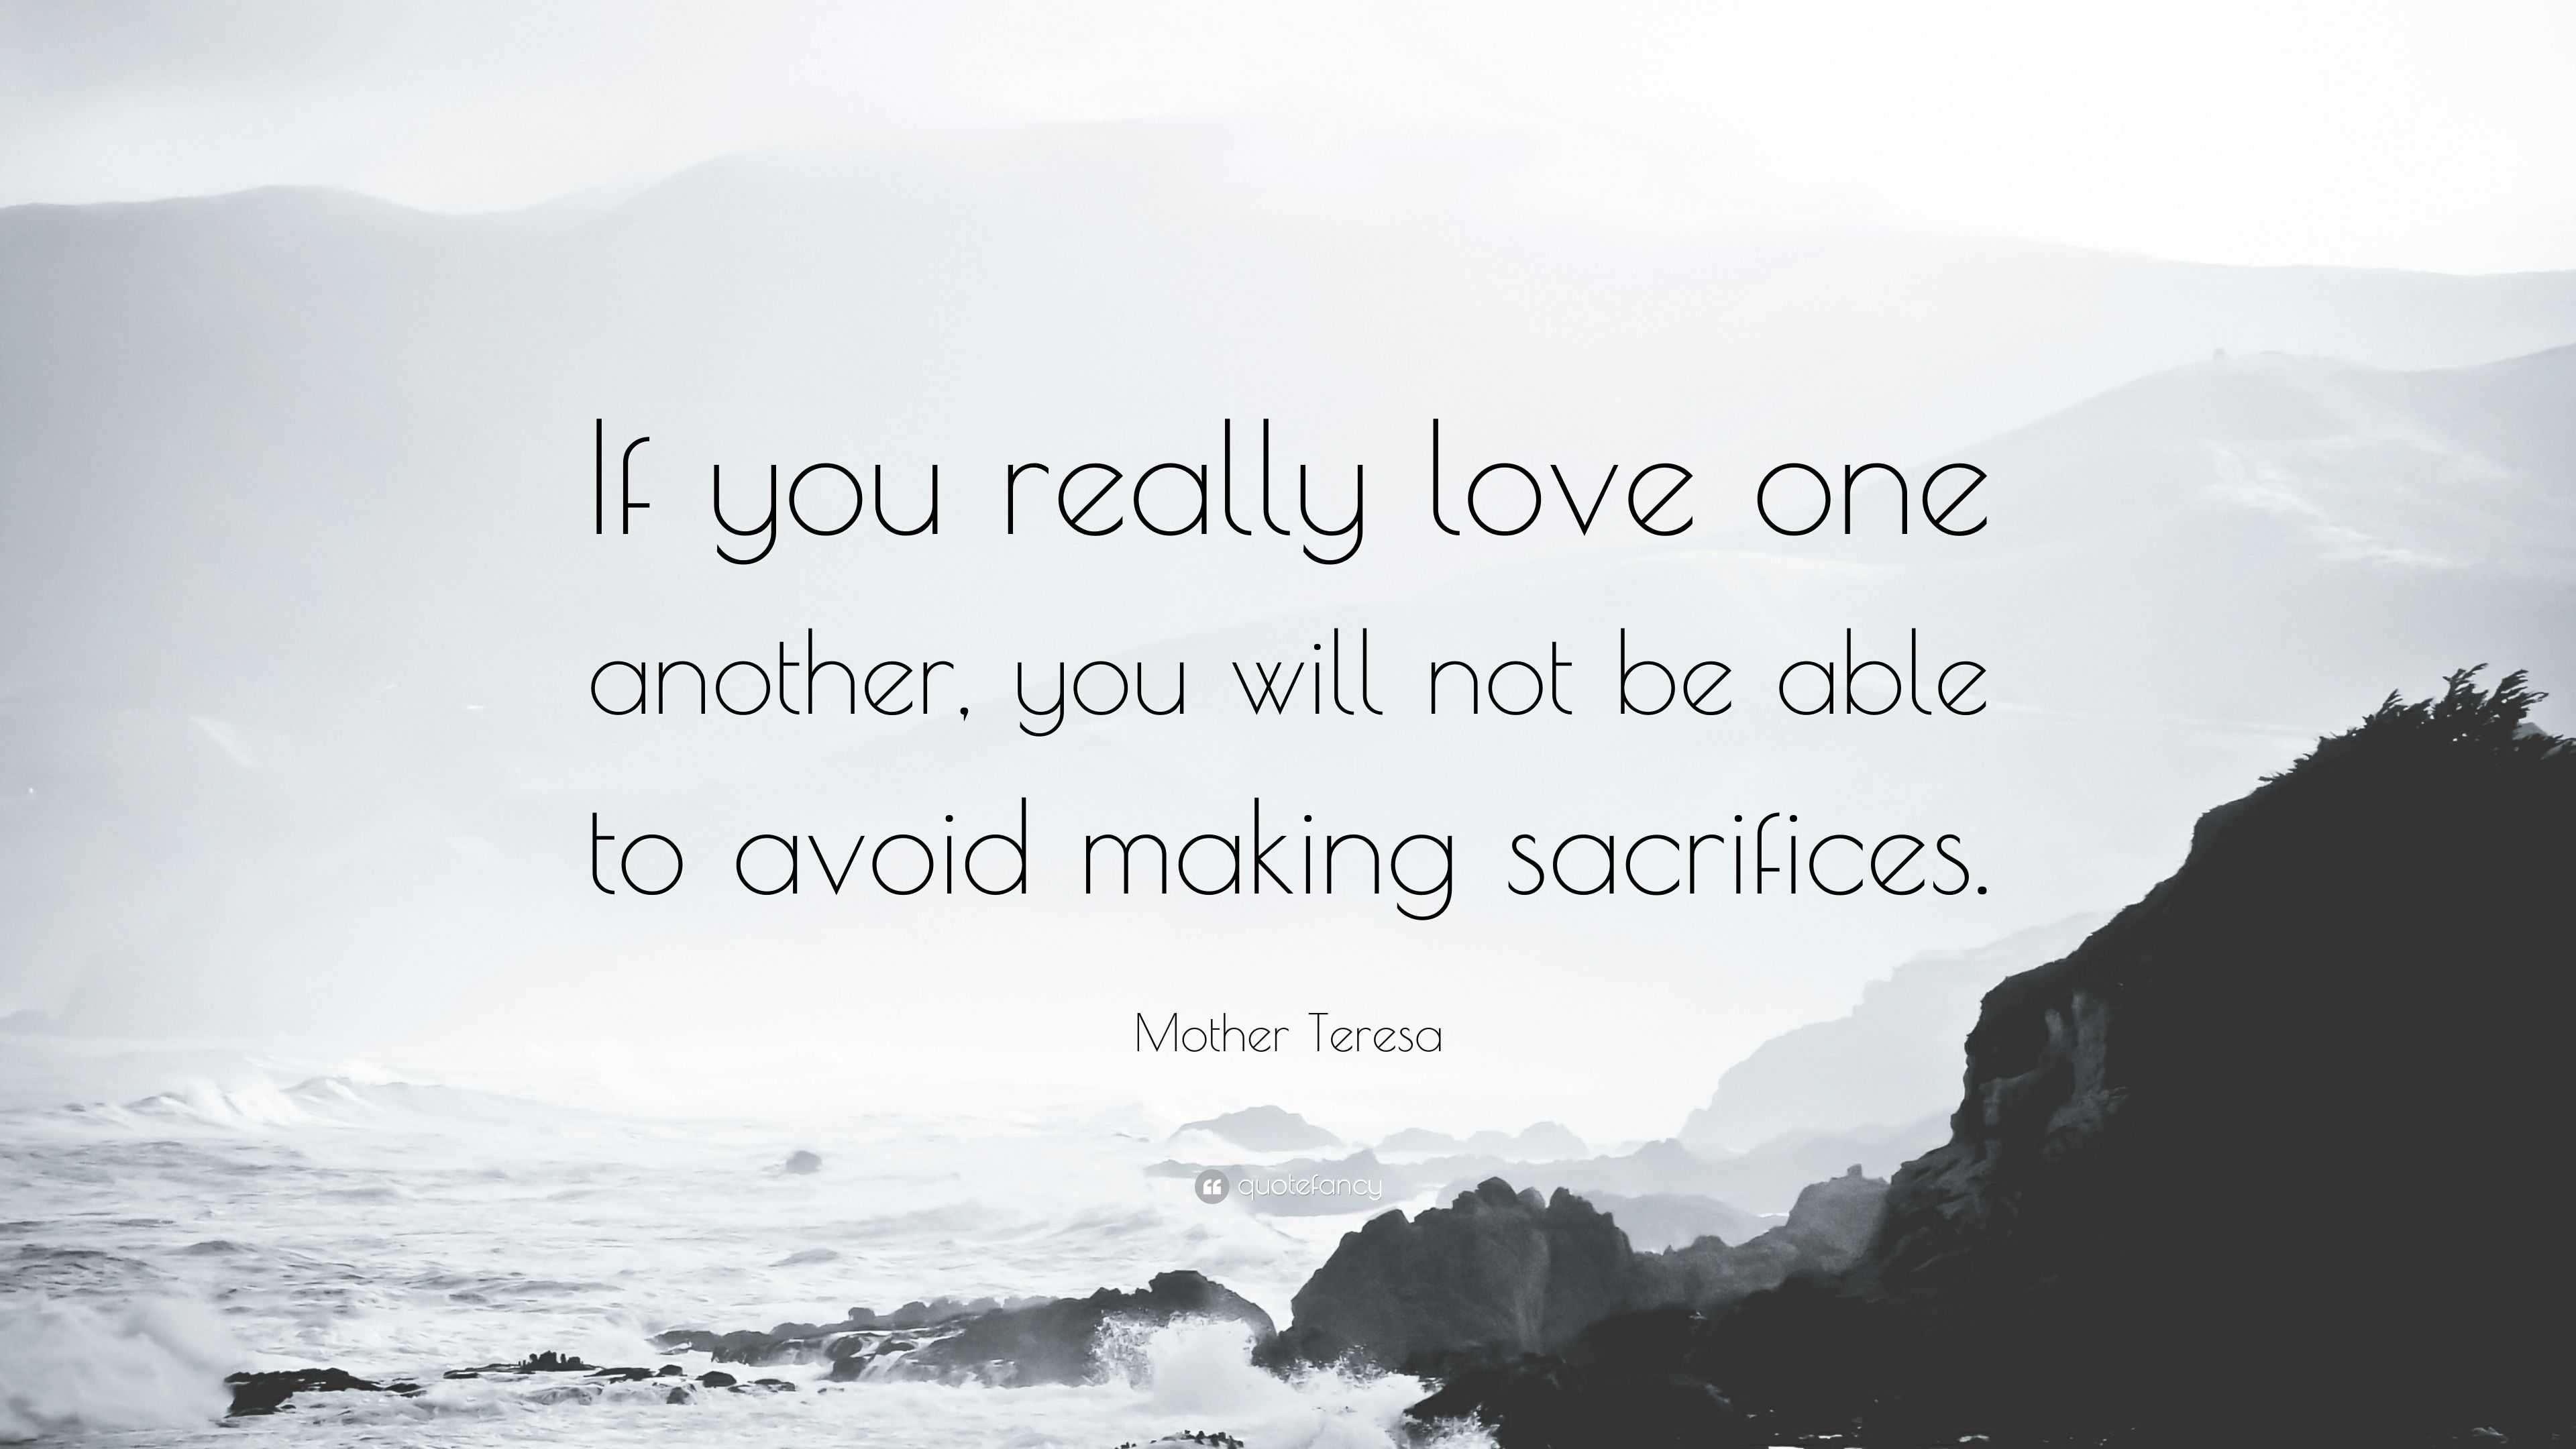 Mother Teresa Quote “If you really love one another you will not be